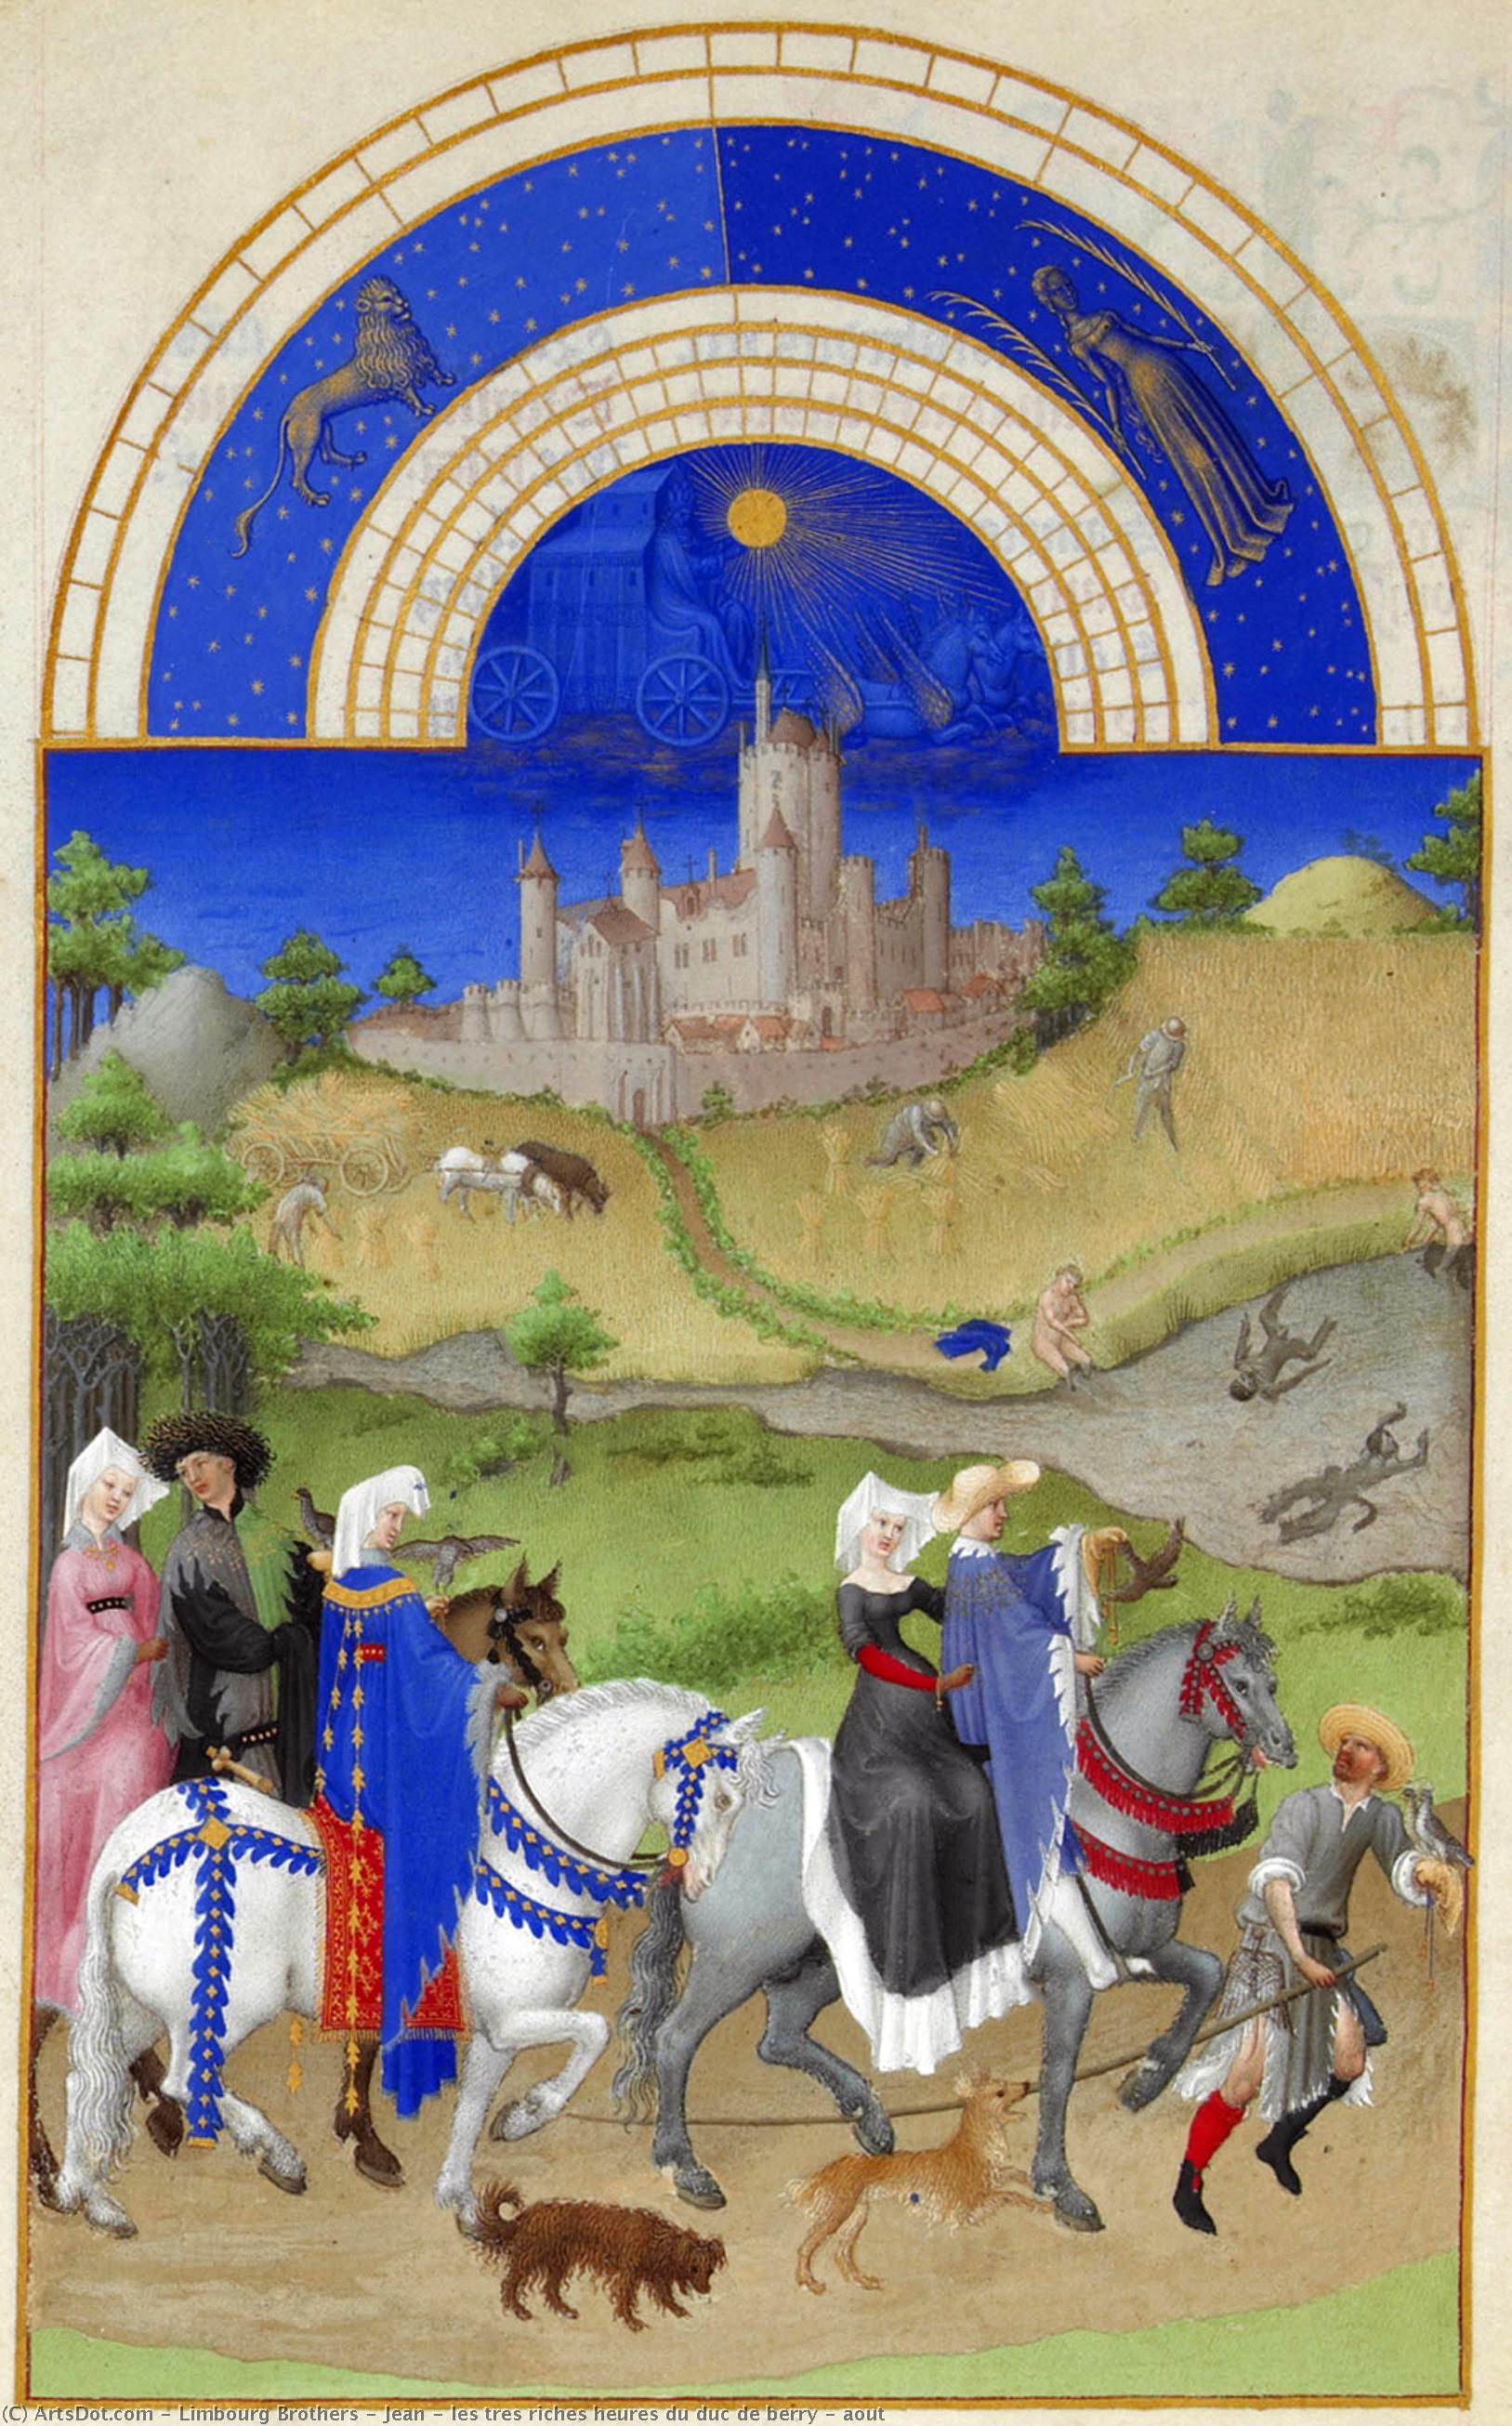 WikiOO.org - 百科事典 - 絵画、アートワーク Limbourg Brothers - ジャン - レス トレス富 ユール デュ 公爵 デ ベリー - aoutは